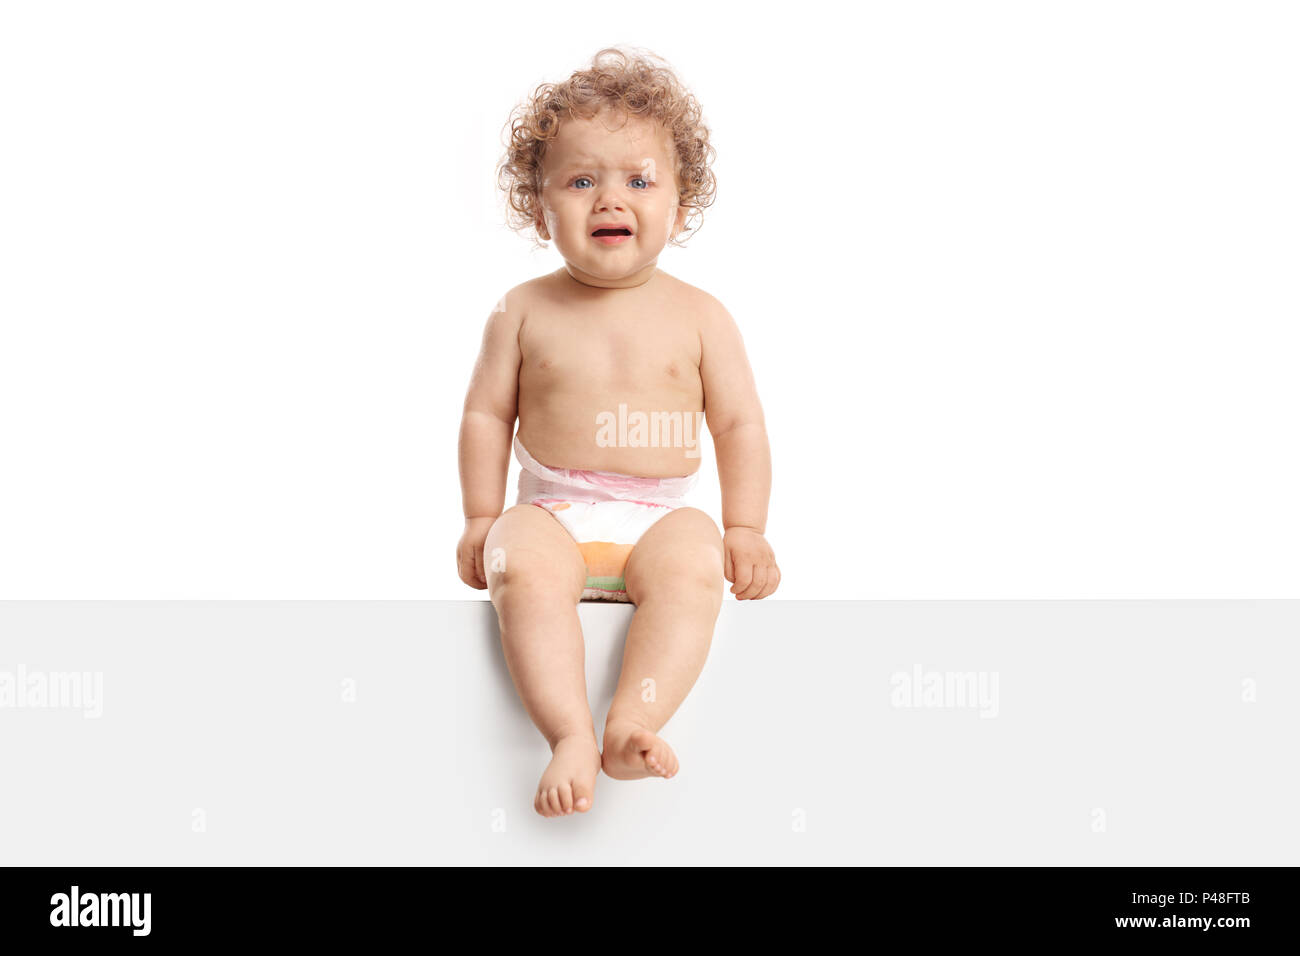 Baby boy sitting on a panel and crying isolated on white background Stock Photo